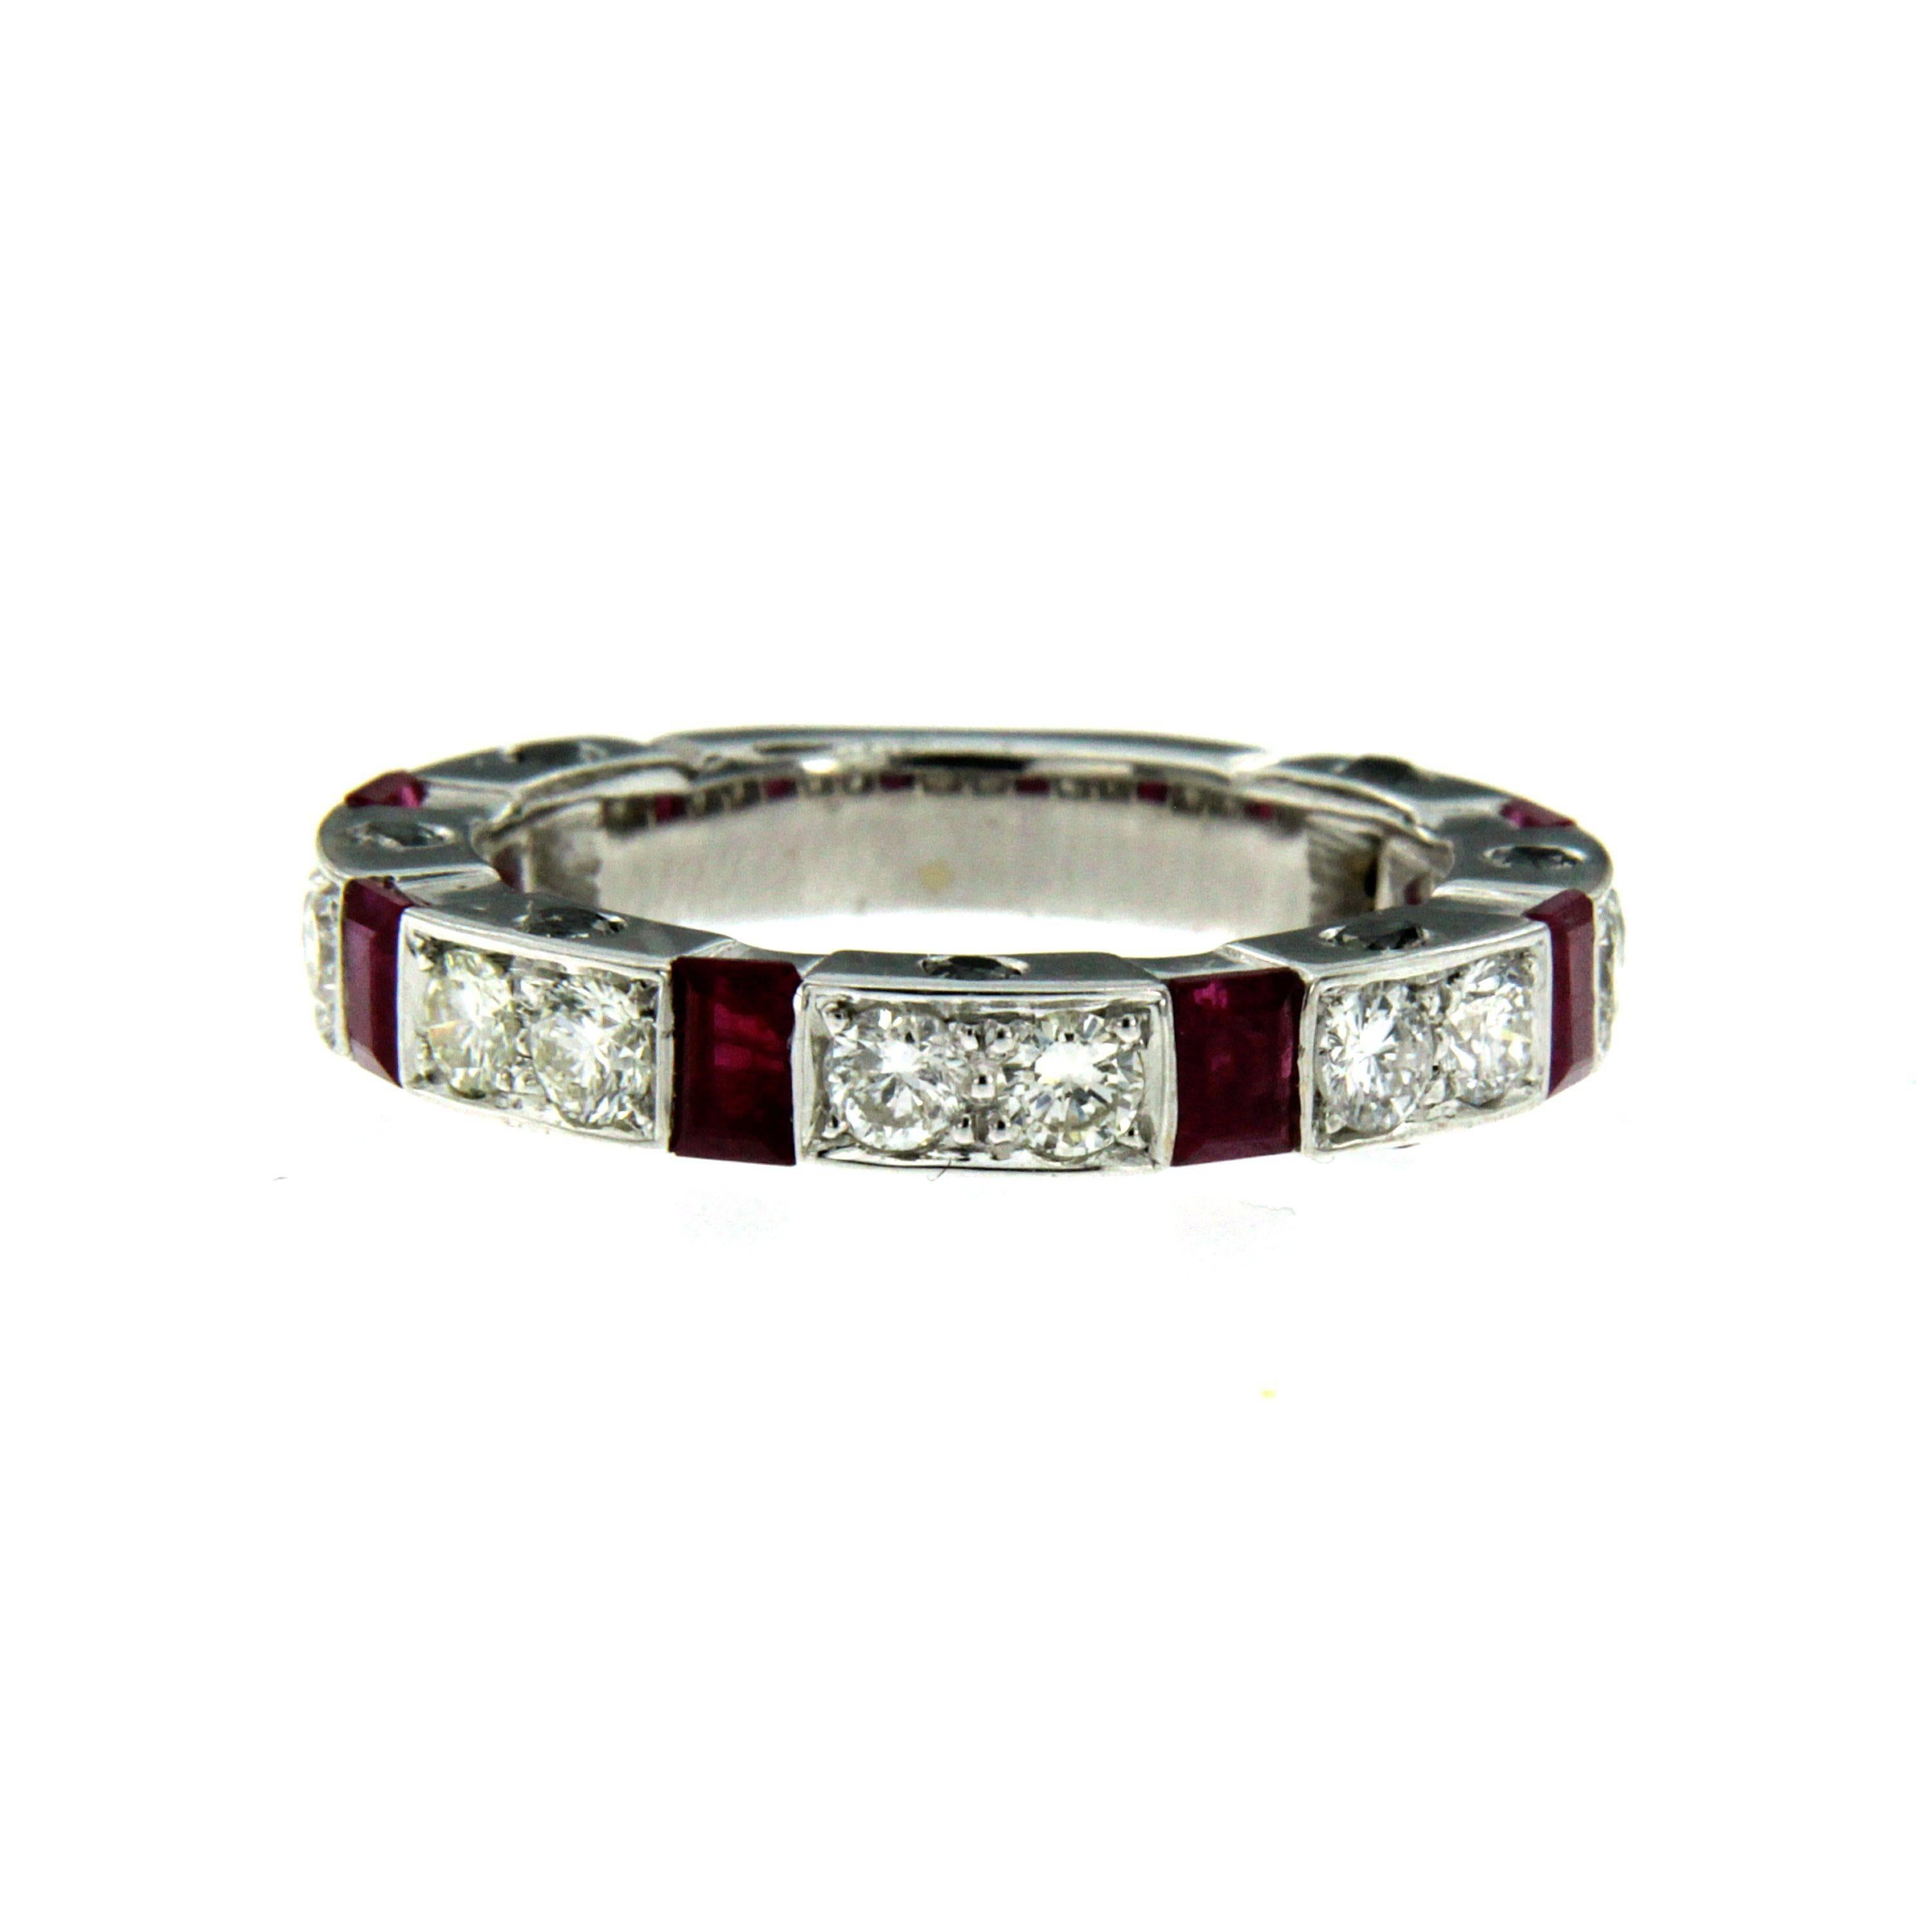 This stunning white gold band ring features round brilliant cut diamonds with a total weight of 1.12 carats G color VVS, 6 rubies weighing totally 0.70 cts and 0.42 cts of black diamonds adorning both sides. 

CONDITION: Brand New
METAL: 18k